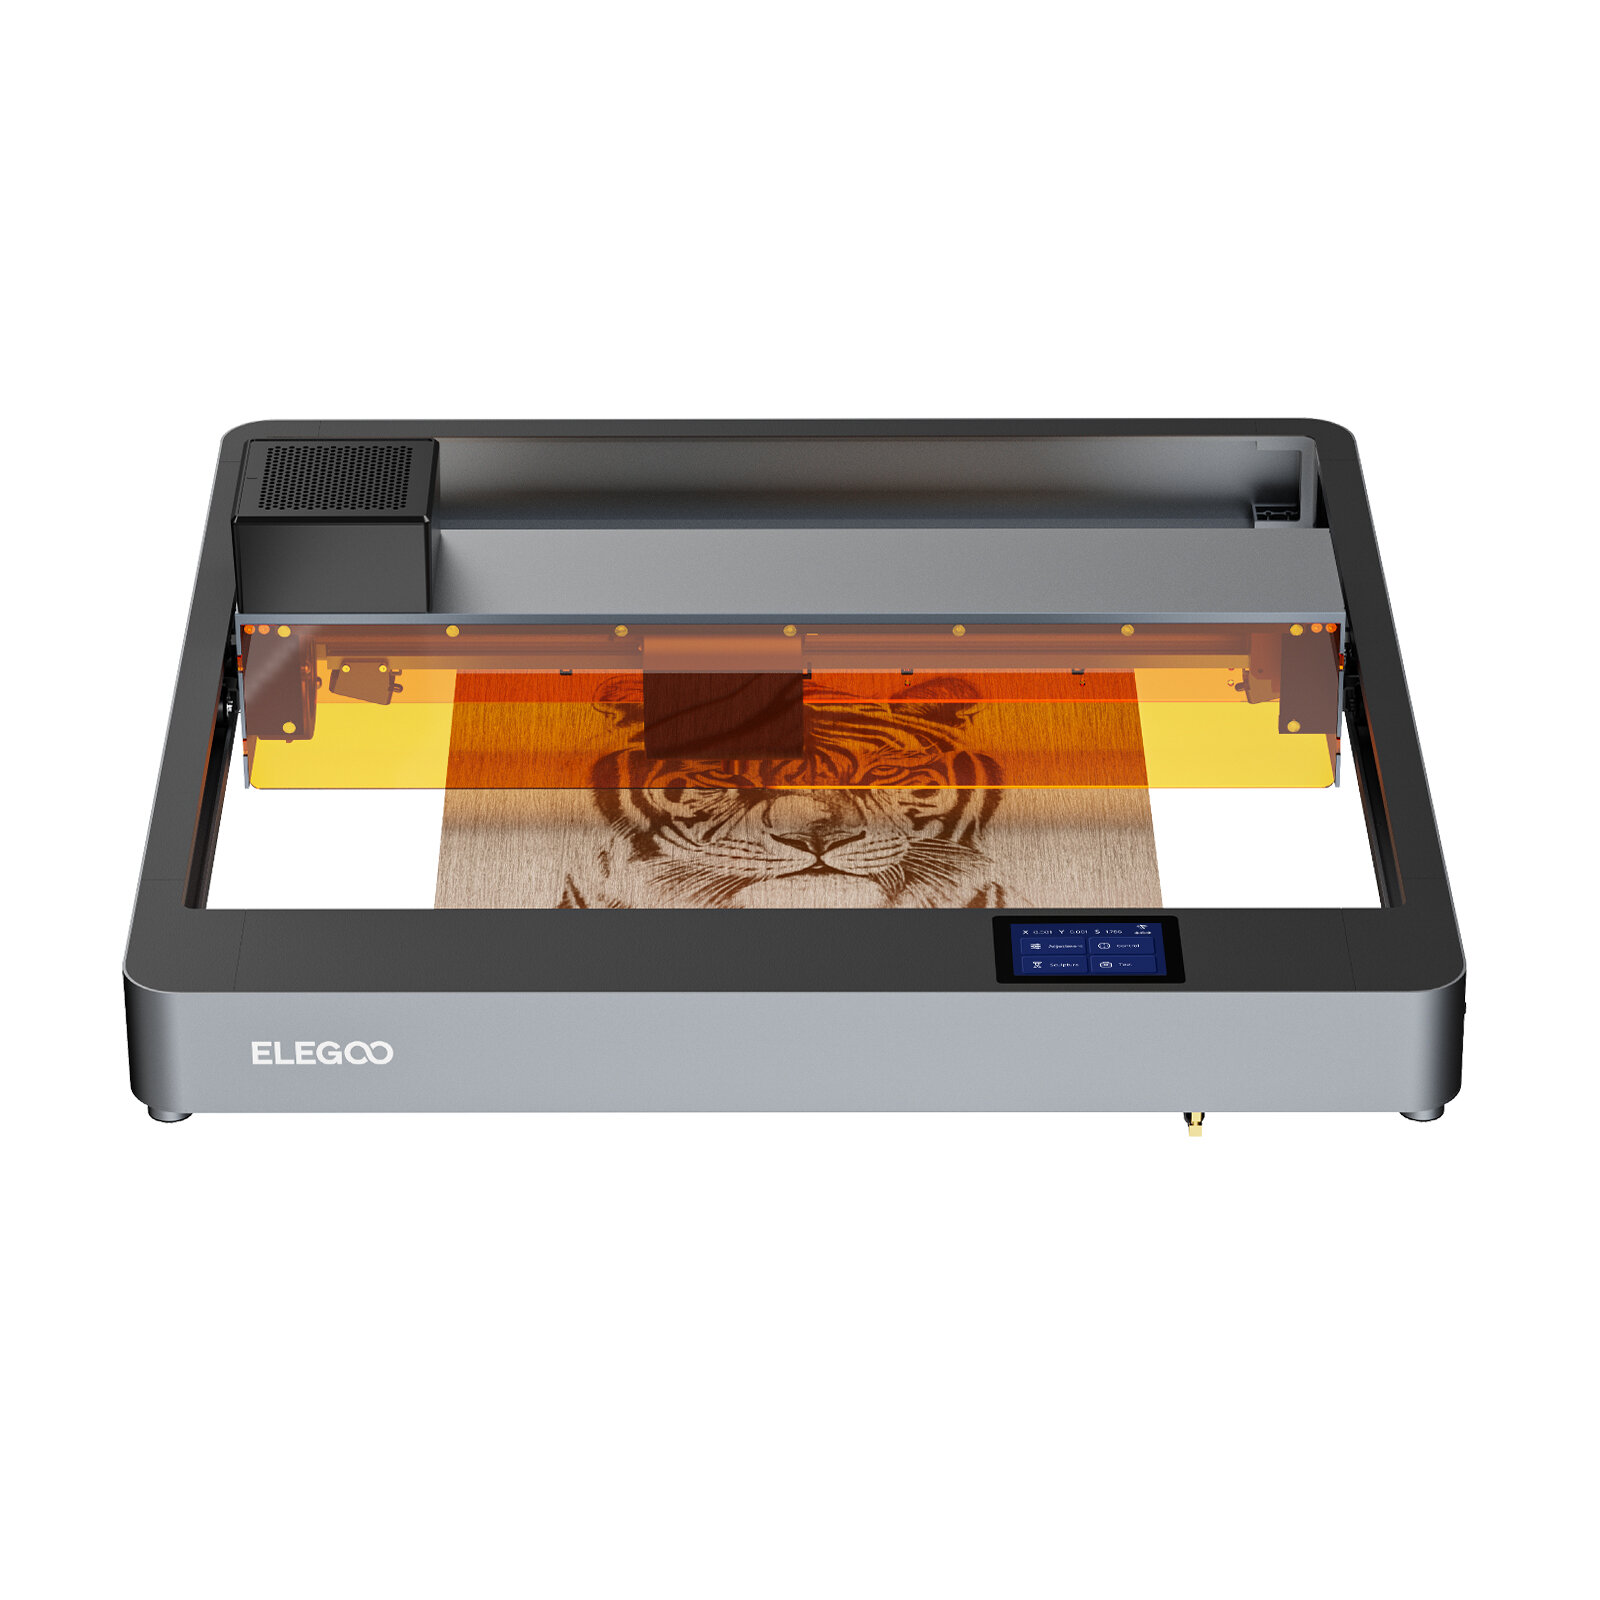 best price,elegoo,phecda,laser,engraver,cutter,20w,with,honeycomb,and,rotary,module,eu,coupon,price,discount